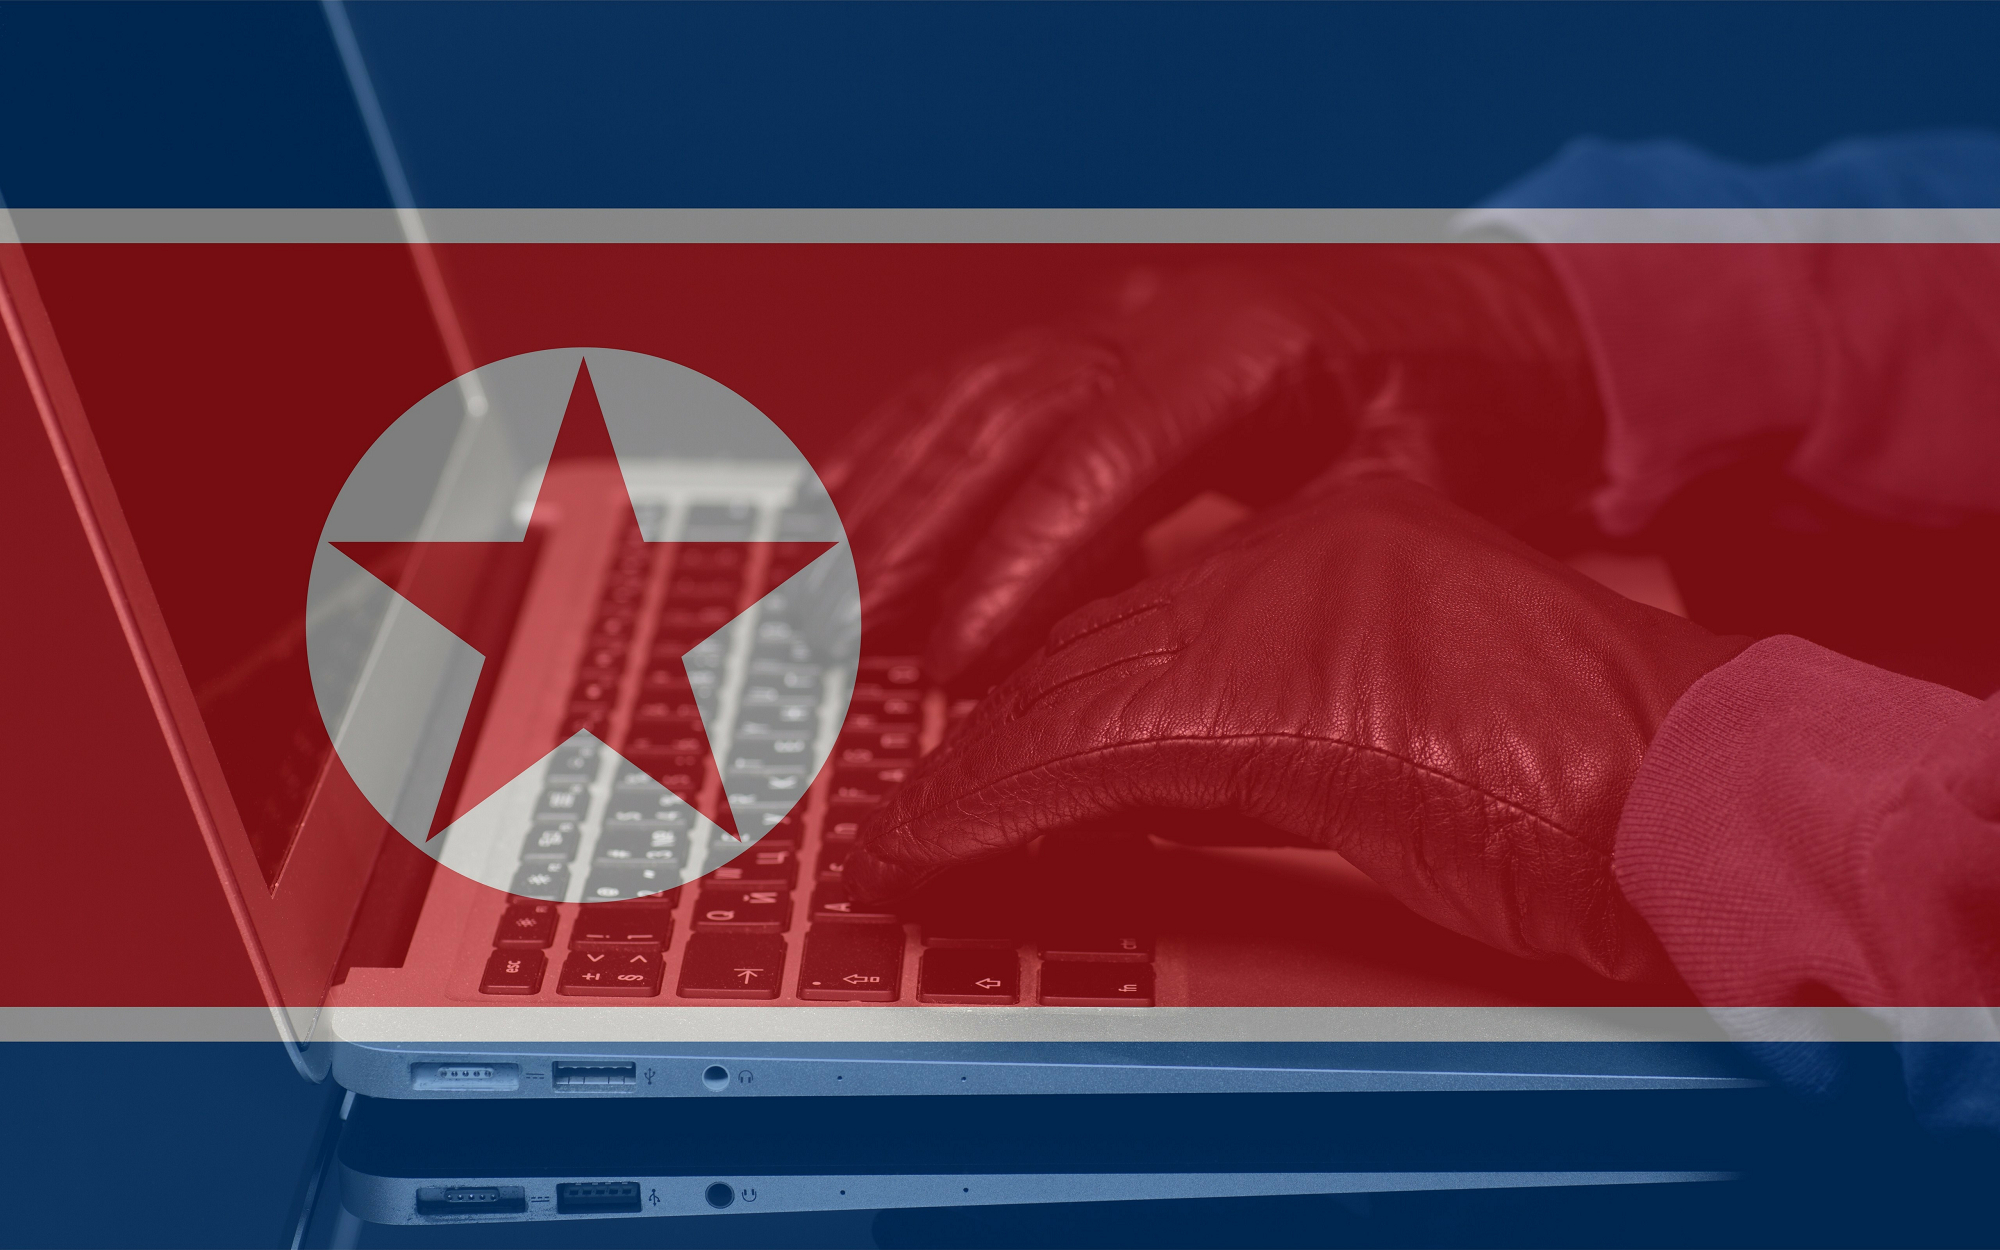 An image showing a hooded hacker using a computer against a backdrop of a North Korean flag.